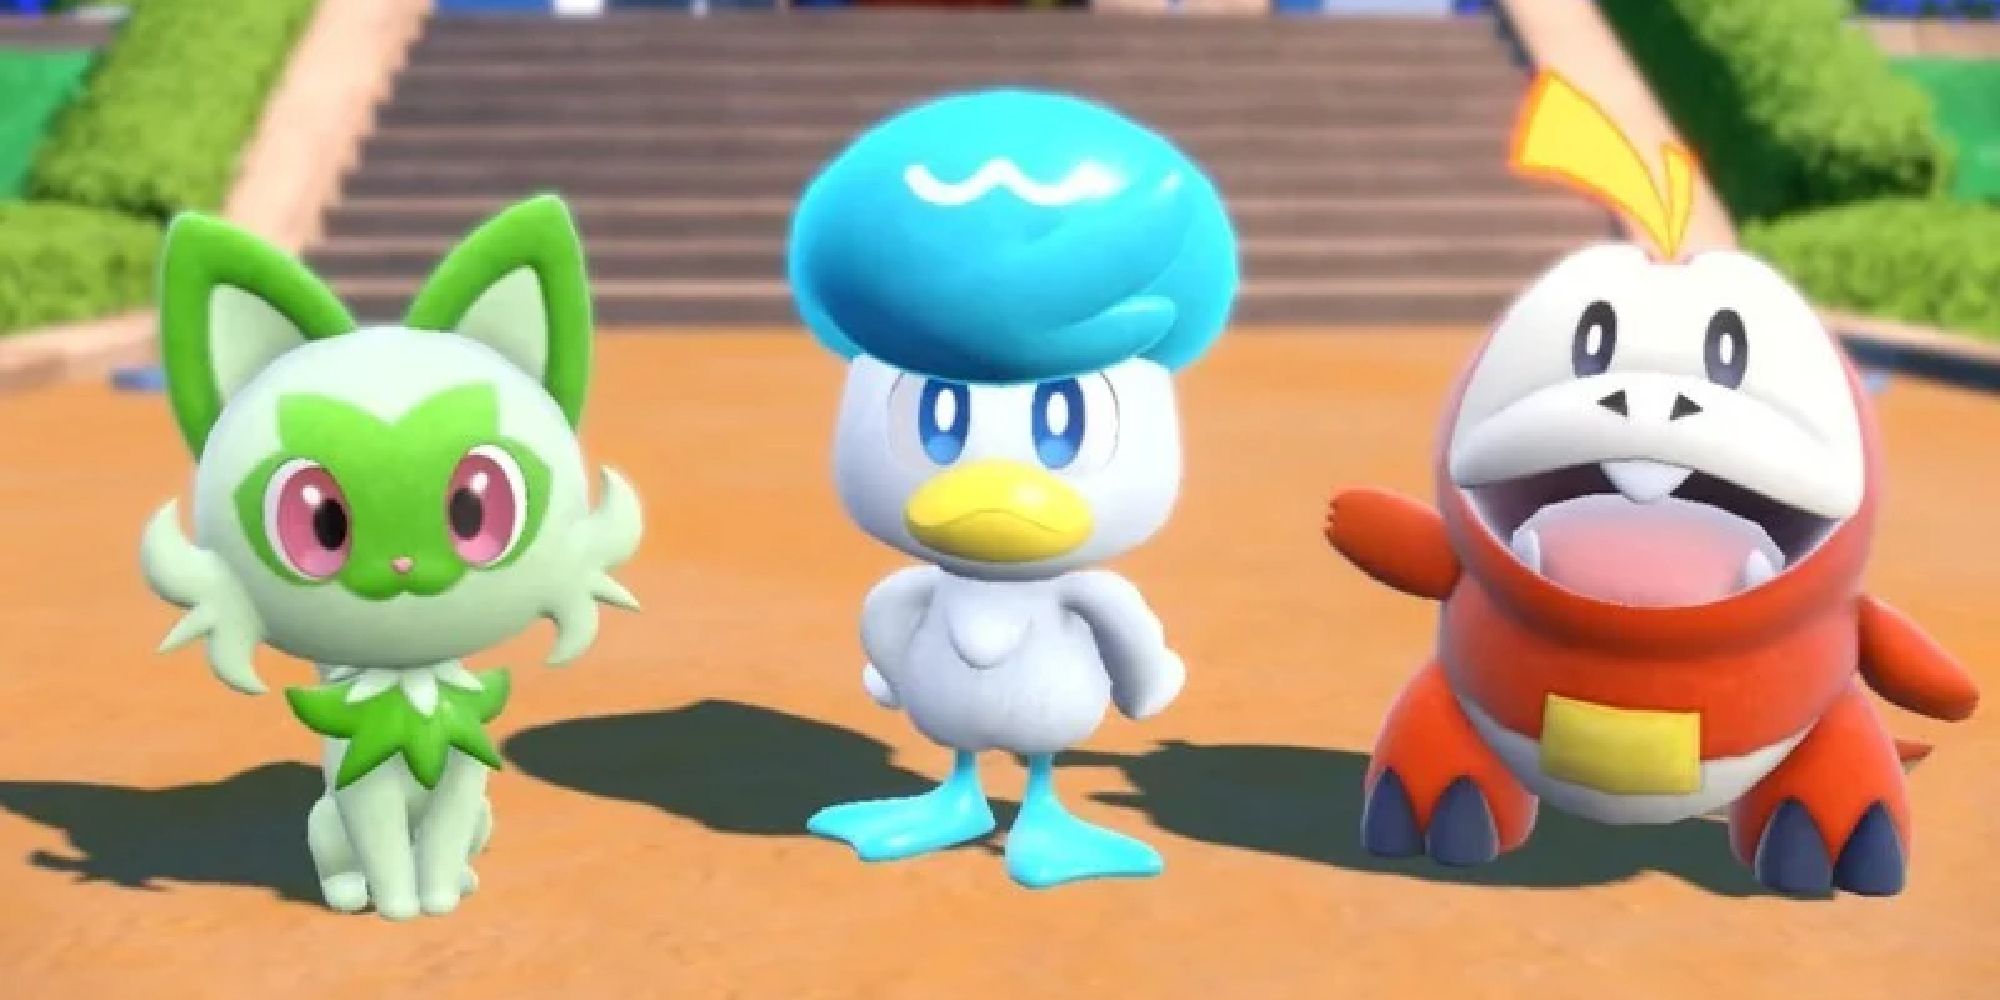 Spiratito, Quaxly, and Fuecoco in a cutscene from Scarlet & Violet